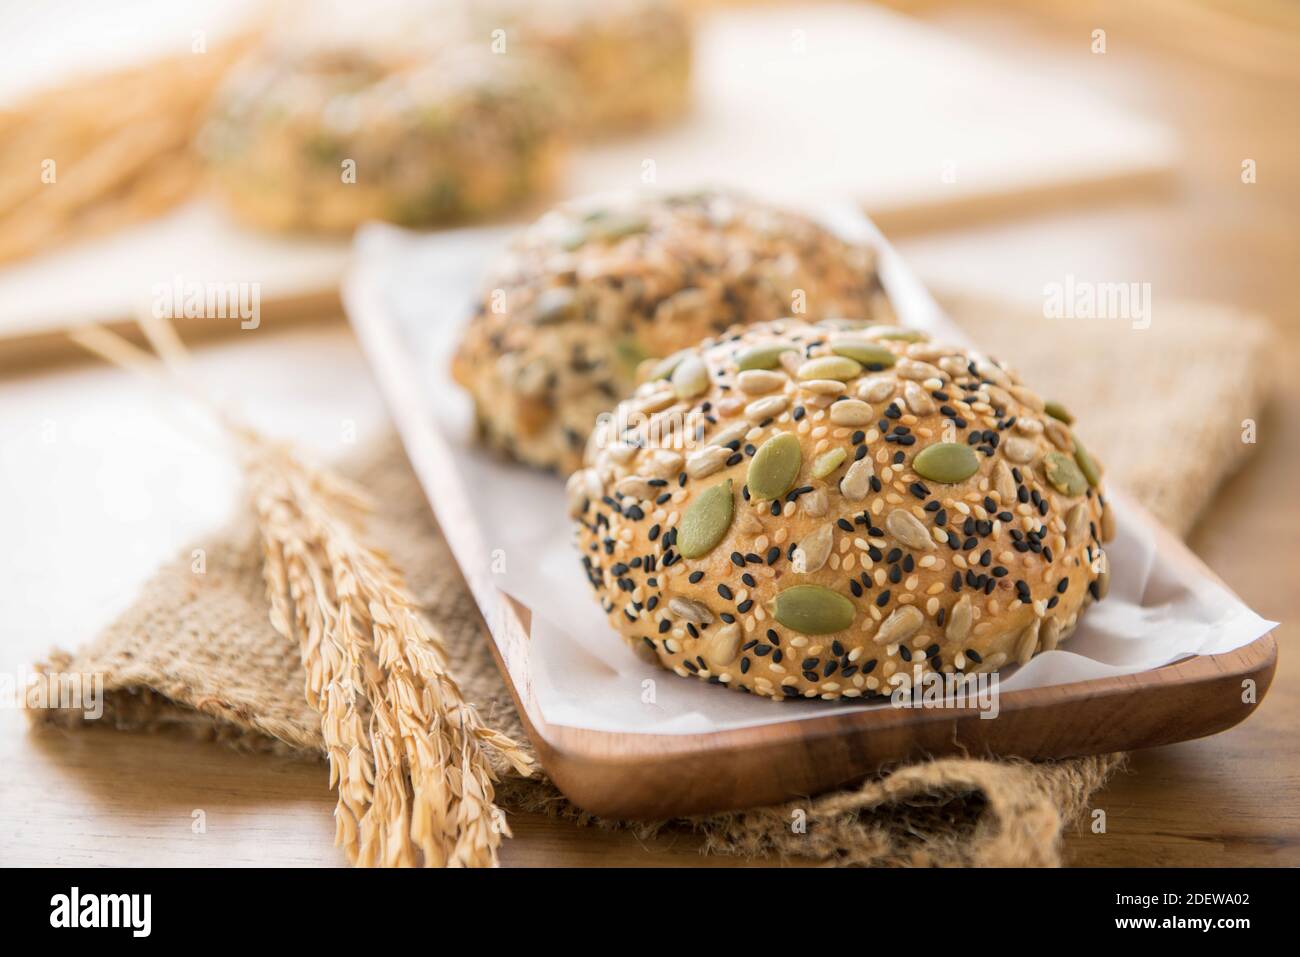 Multigrain mixed cereal seed healthy bread buns in wooden plate displaying with on brown jute sack texture at the table Stock Photo